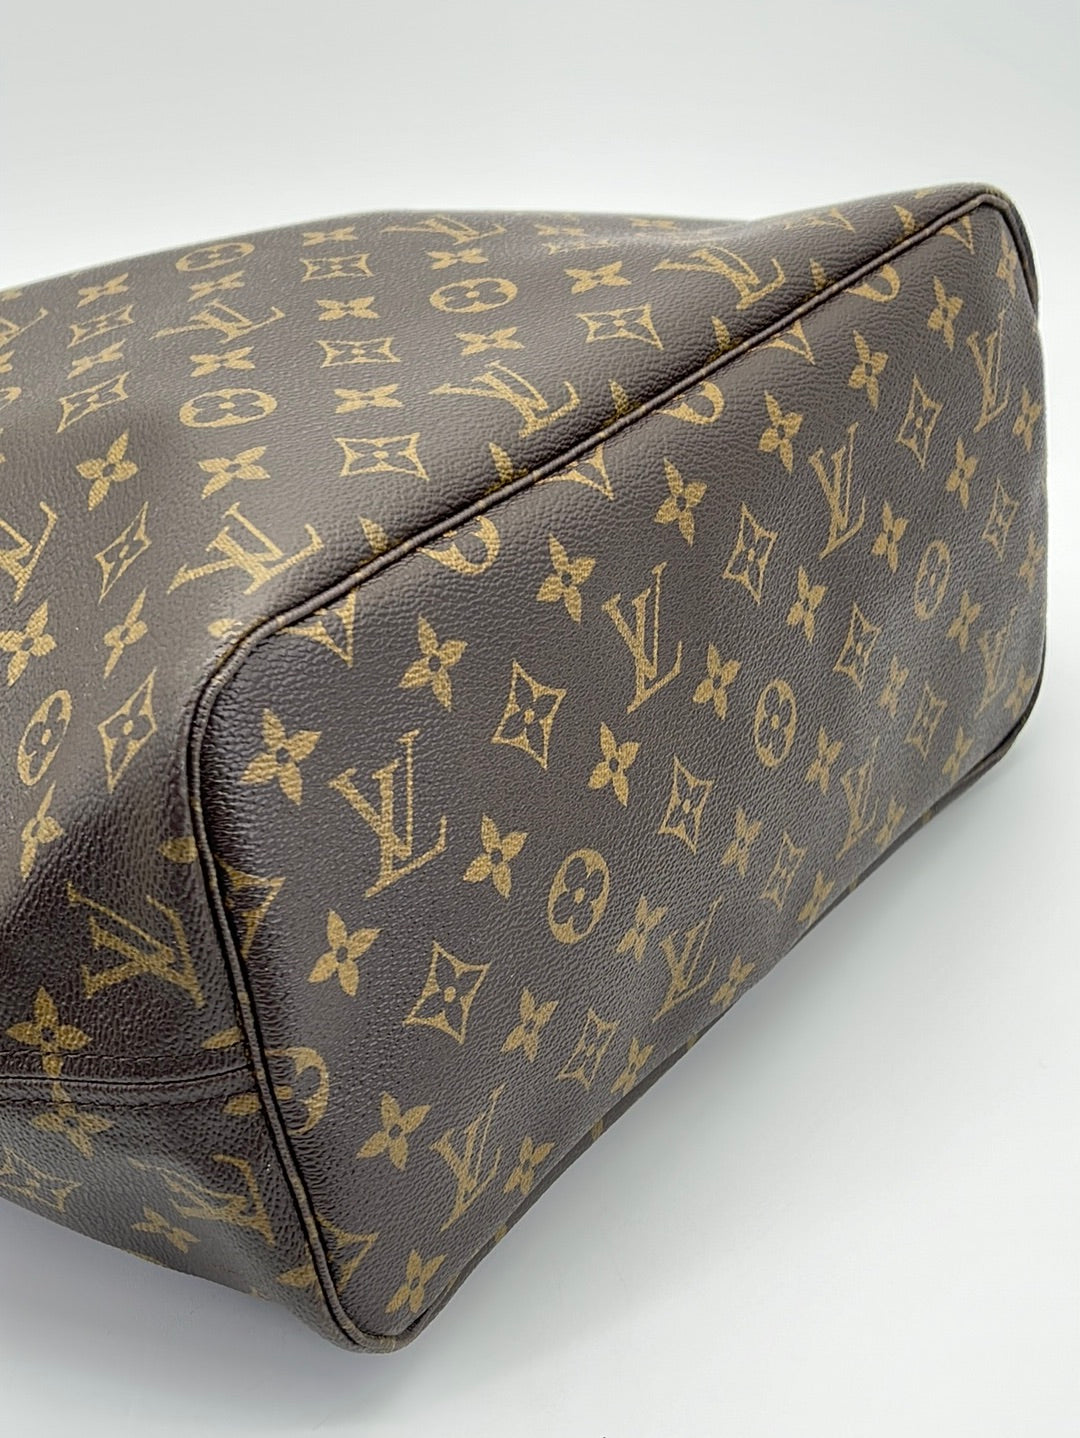 Pre-Owned Louis Vuitton Neverfull MM Tote Bag M45679 Monogram